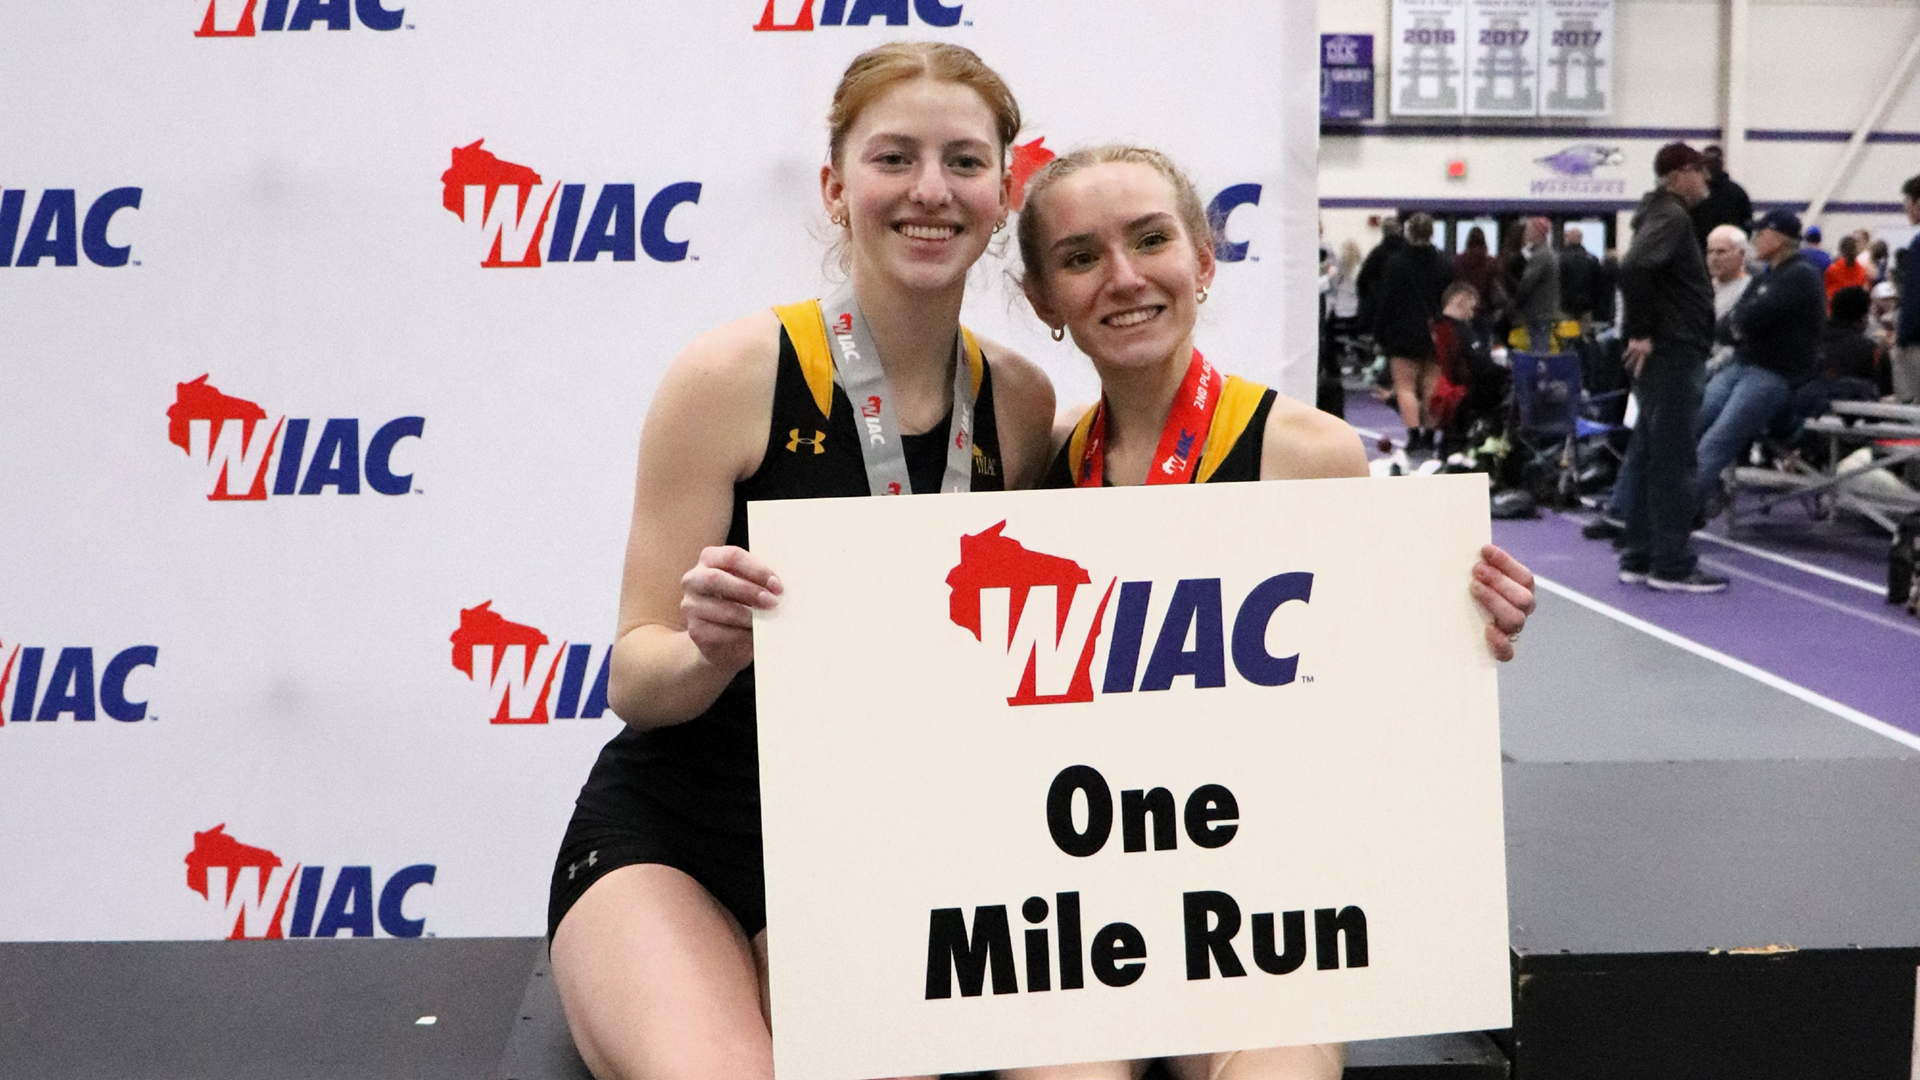 Cyna Madigan (left) and Amelia Lehman (right) after podium finishes in he mile run on Friday. Photo Credit: Autumn Krause, UW-Whitewater Sports Information